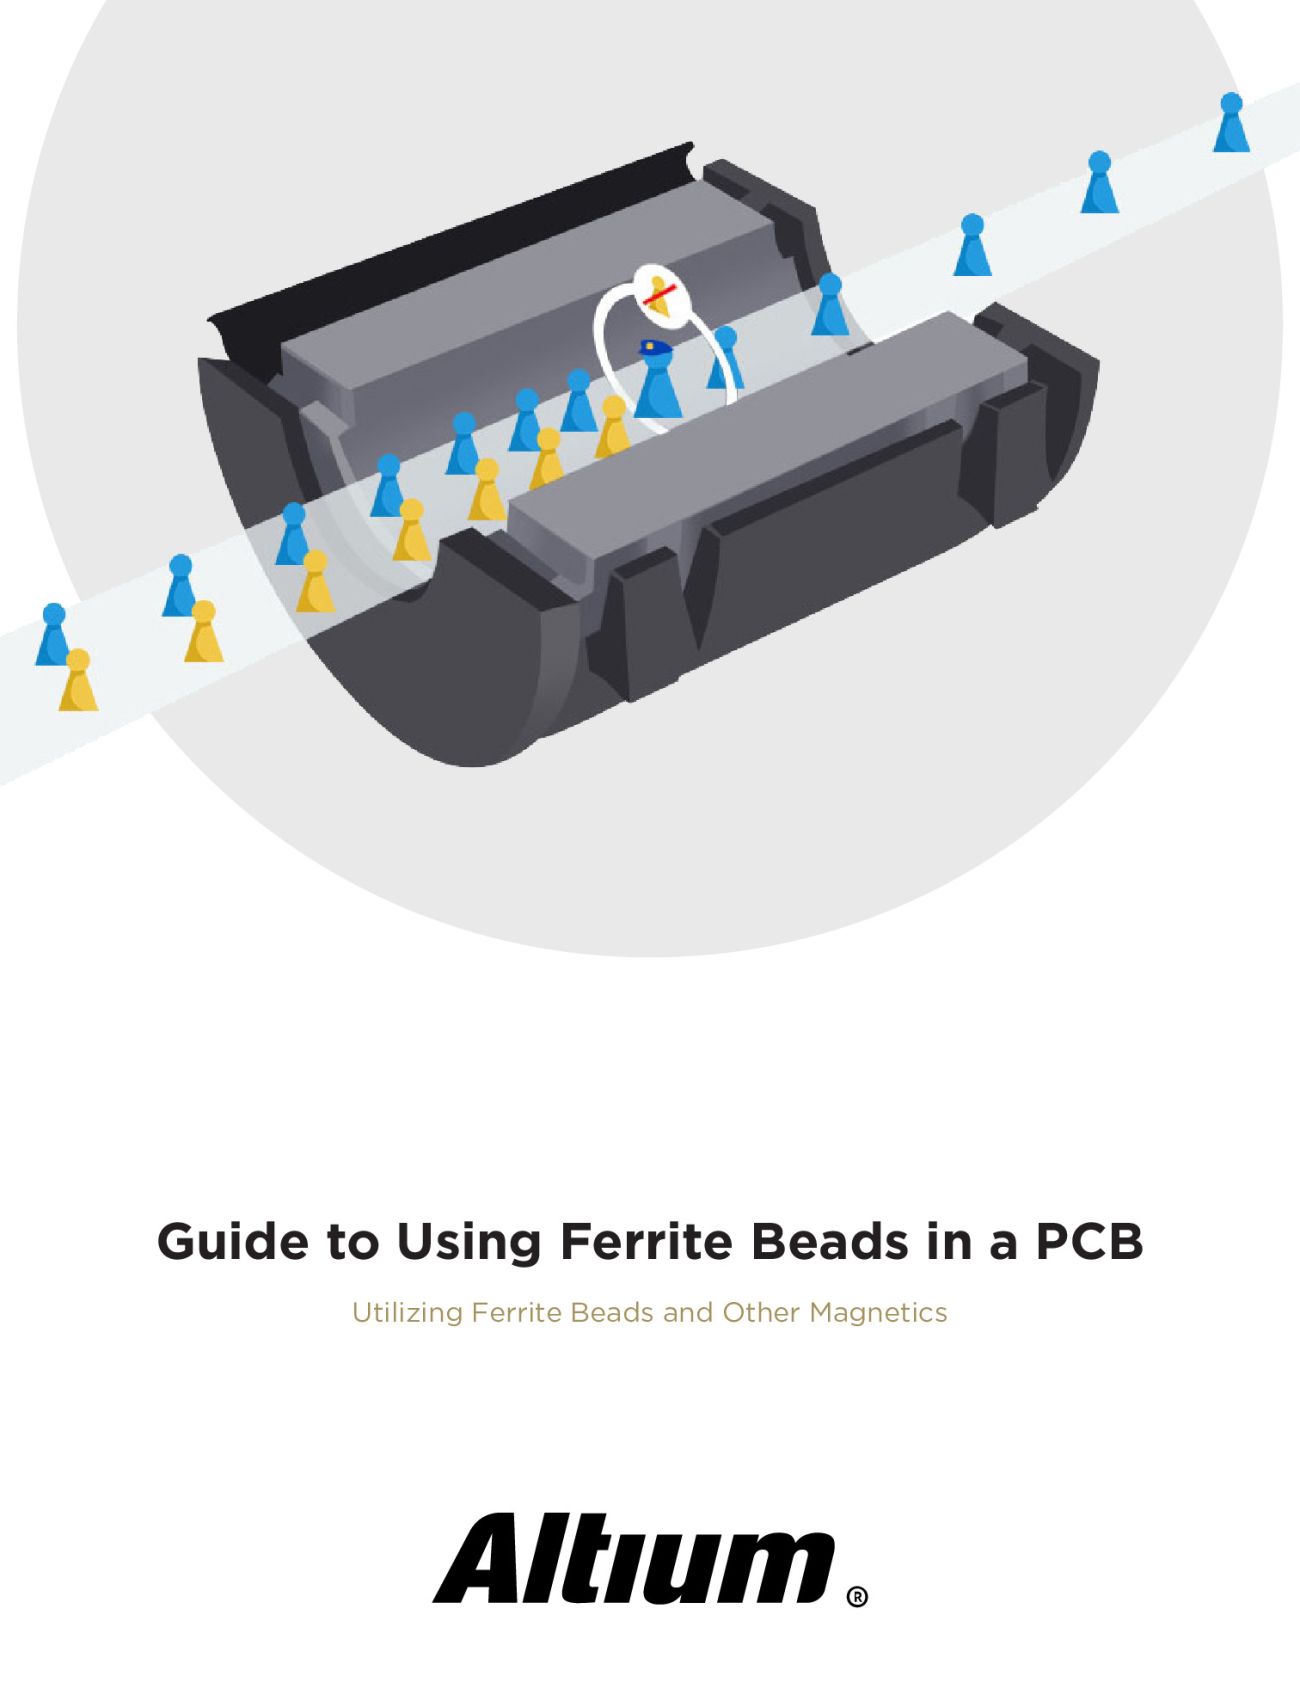 Guide to Using Ferrite Beads in a PCB